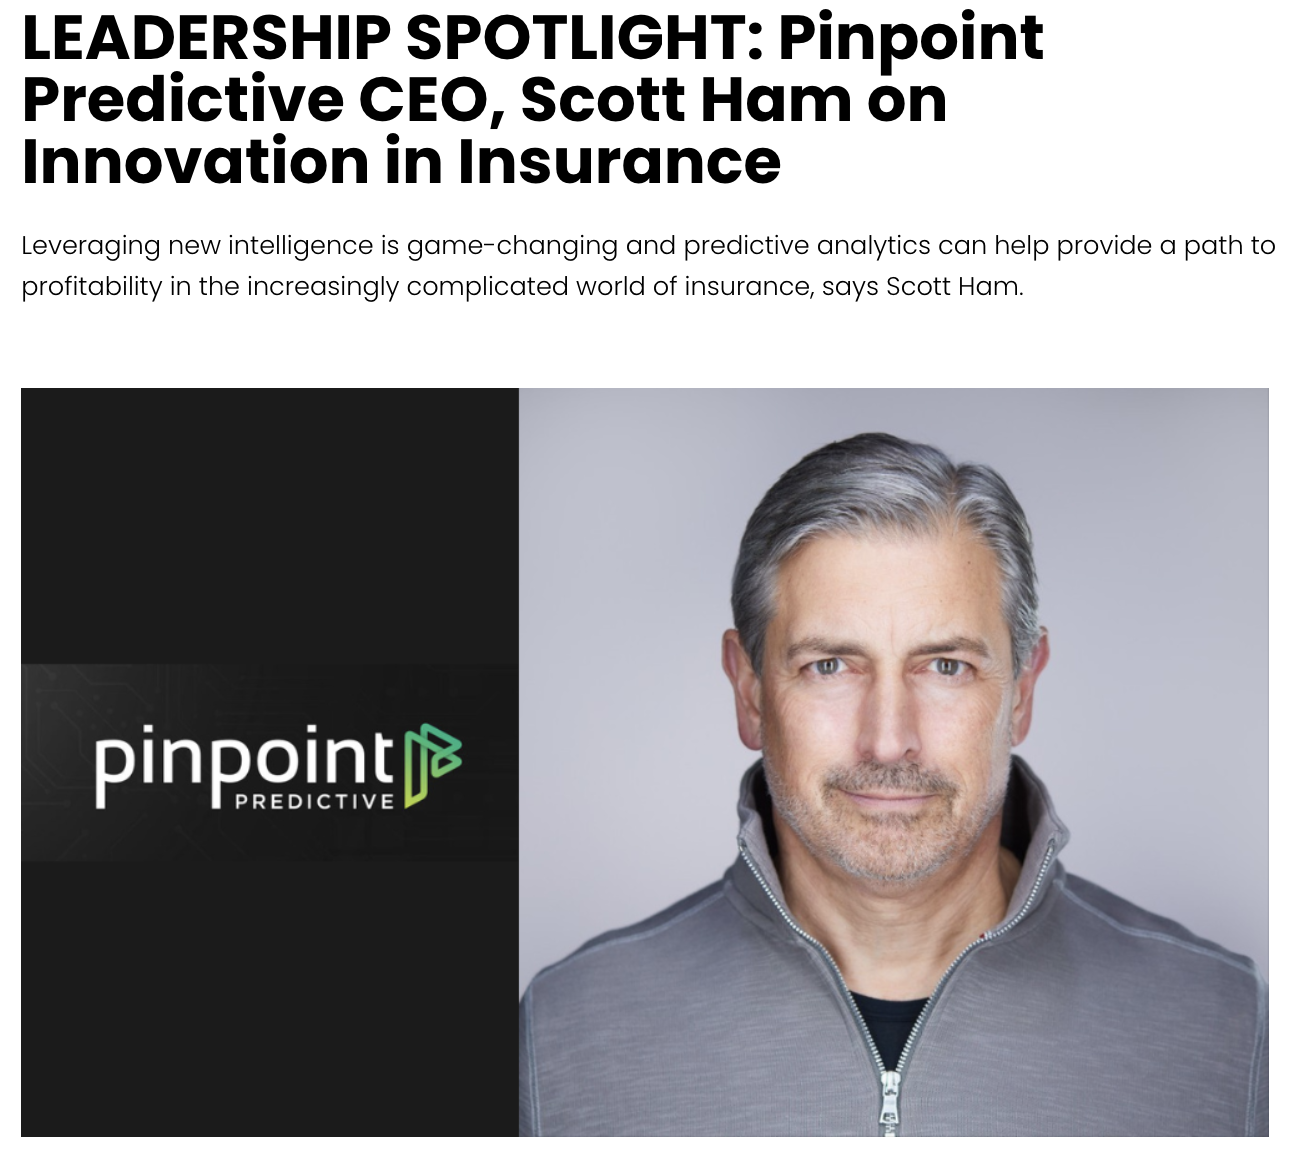 Scott Ham headshot on front page of Insurtech Insights online interview with logo